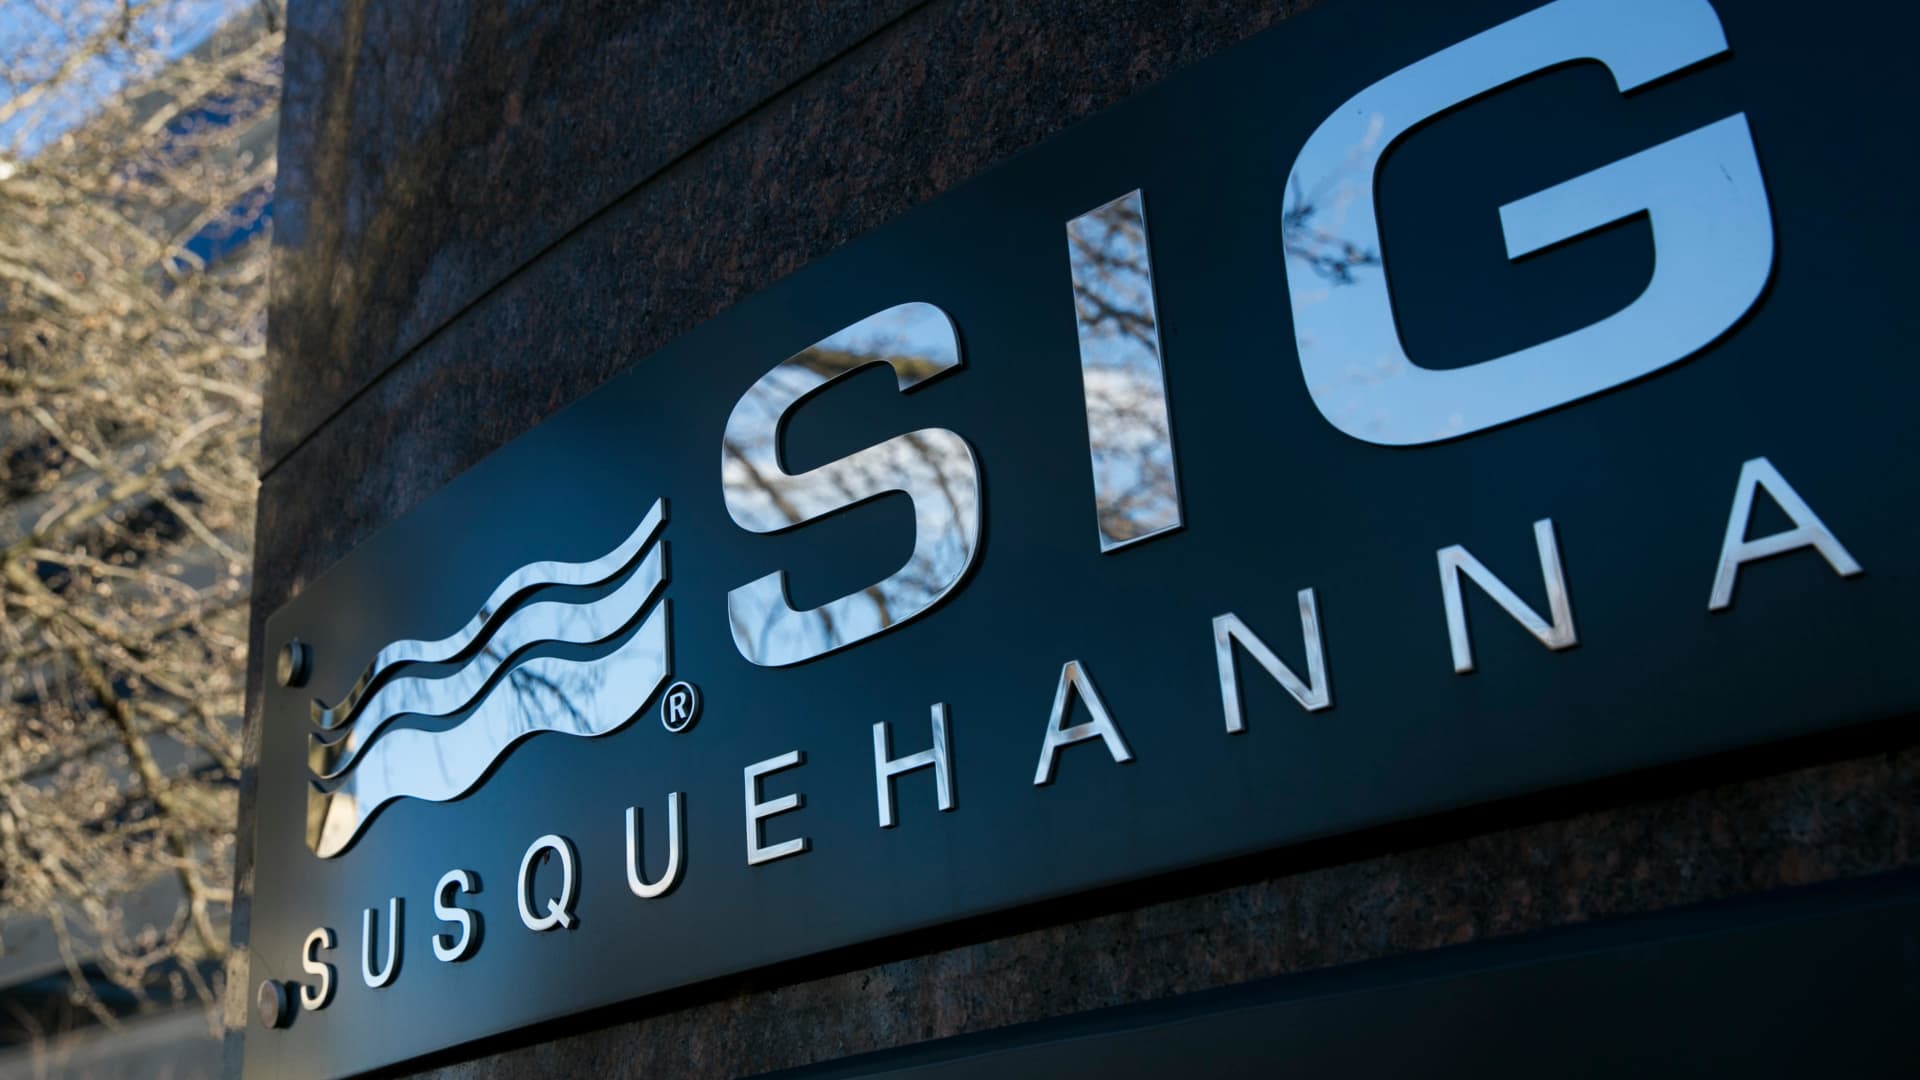 A logo sign outside of the headquarters of Susquehanna International Group in Bala Cynwyd, Pennsylvania on January 3, 2016.